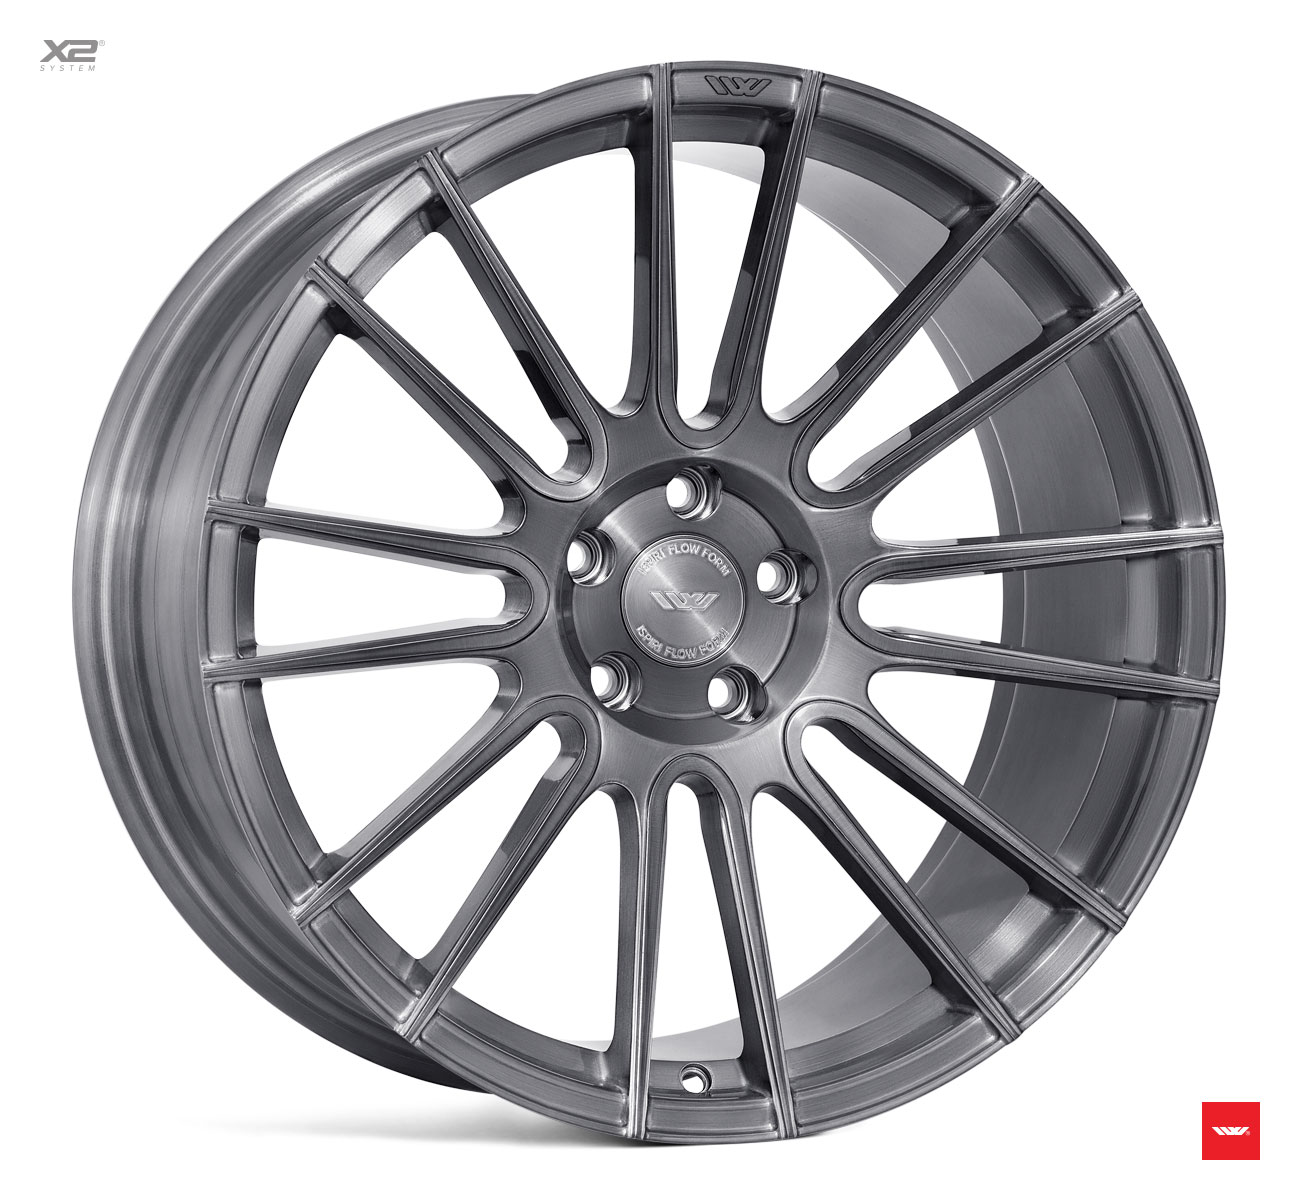 NEW 20  ISPIRI FFR8 8 TWIN CURVED SPOKE ALLOY WHEELS IN FULL BRUSHED CARBON TITANIUM  VARIOUS FITMENTS AVAILABLE